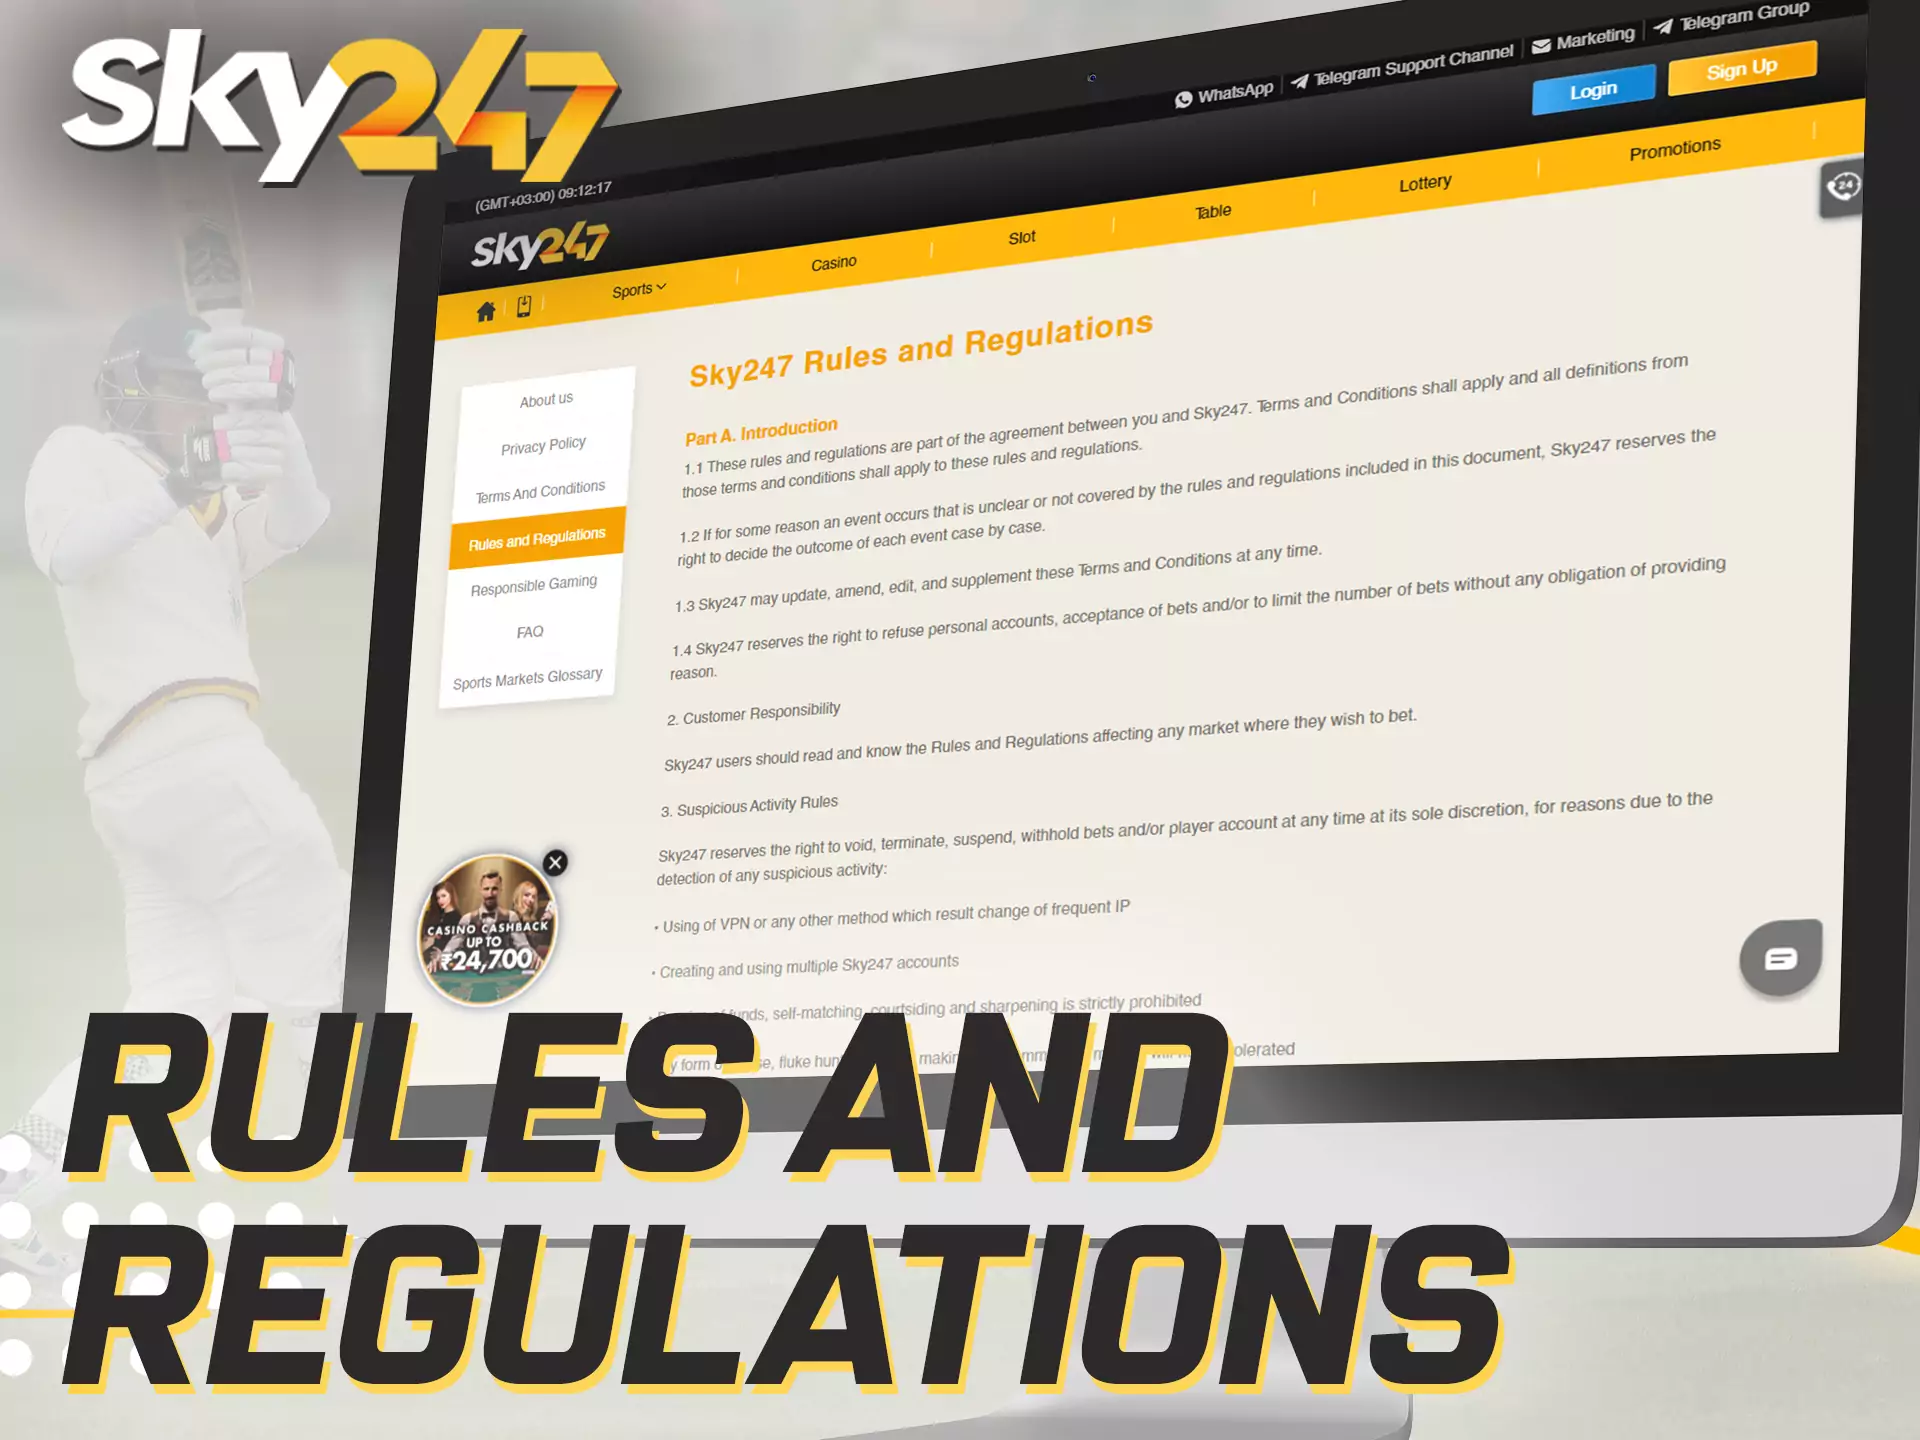 Be aware of Sky247 rules and don't break them.